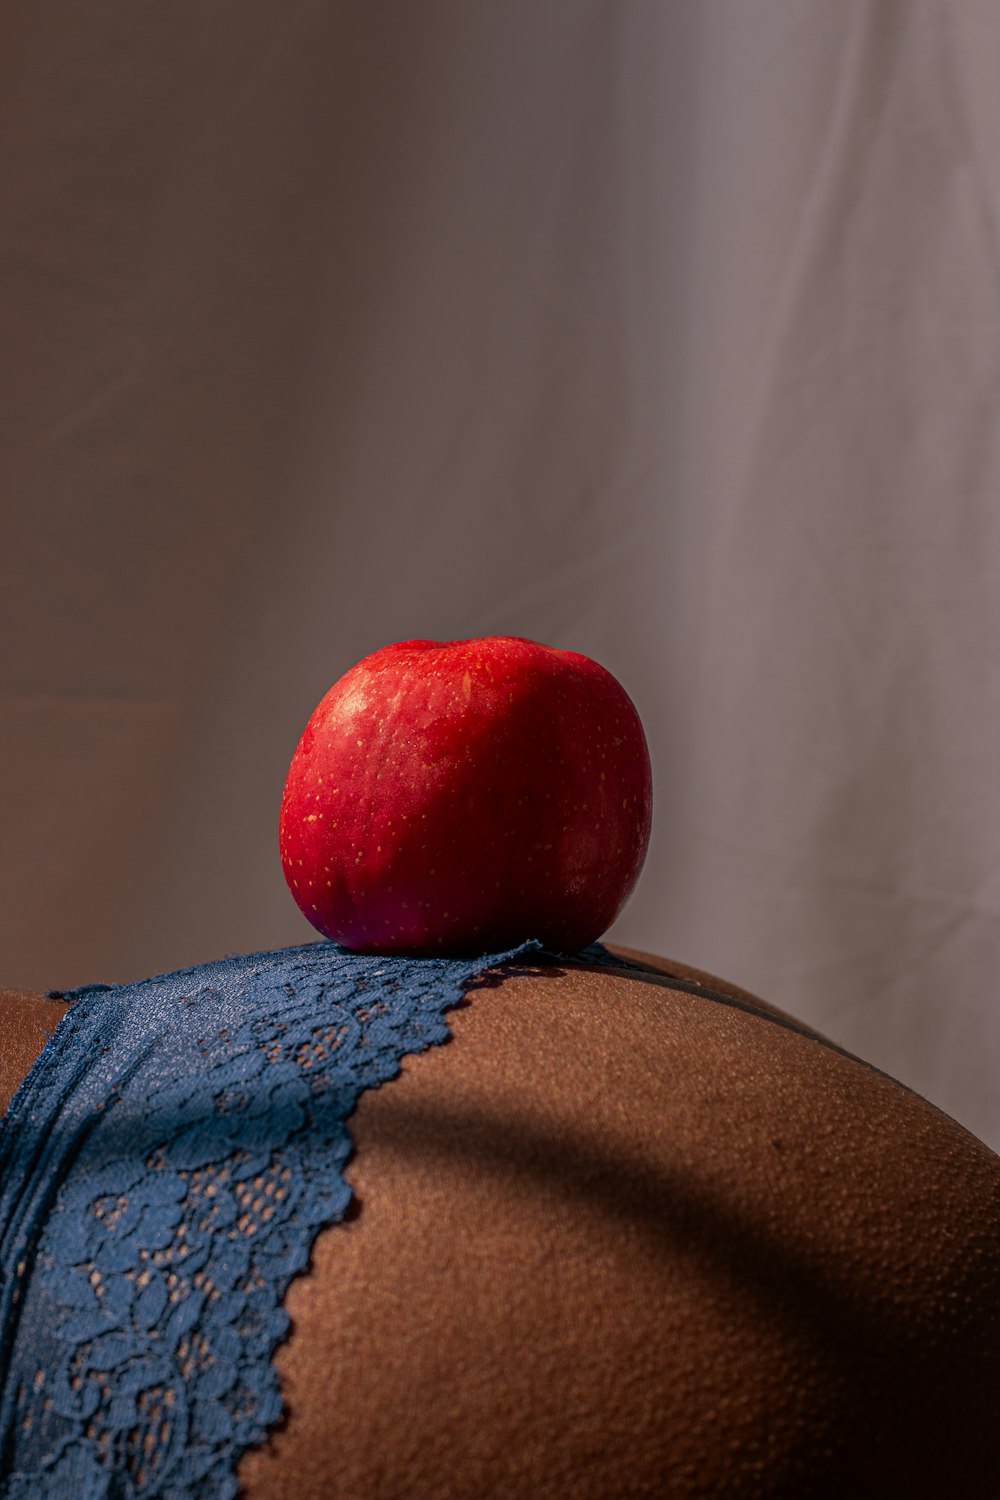 red apple on blue and white floral textile